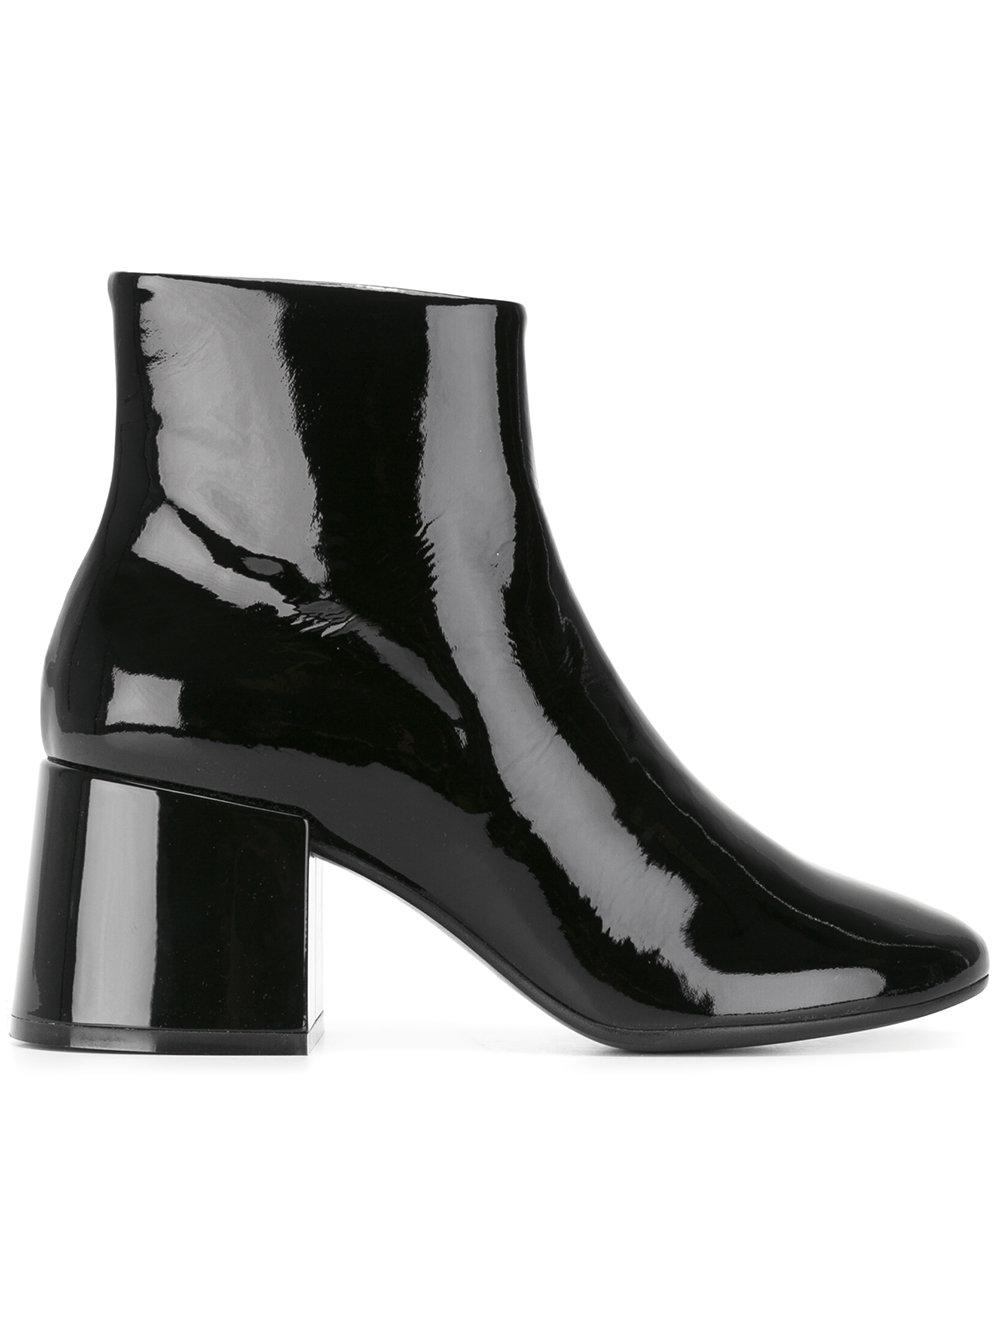 Lyst - Mm6 By Maison Martin Margiela 'courreges' Boots in Black